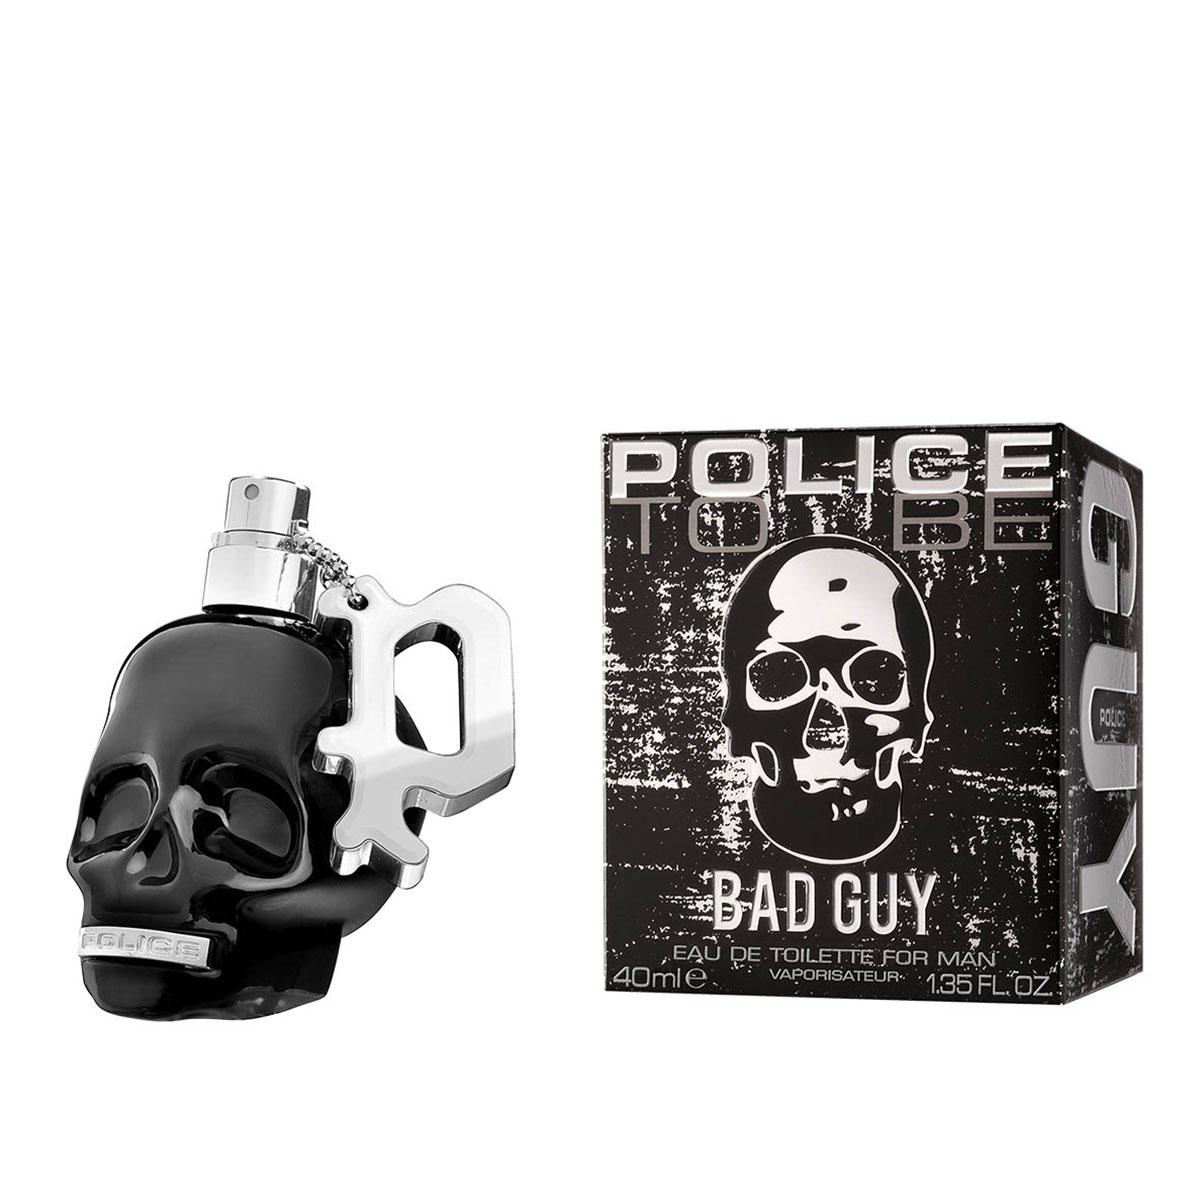 Selected image for POLICE Muška toaletna voda To Be Bad Guy 40ml